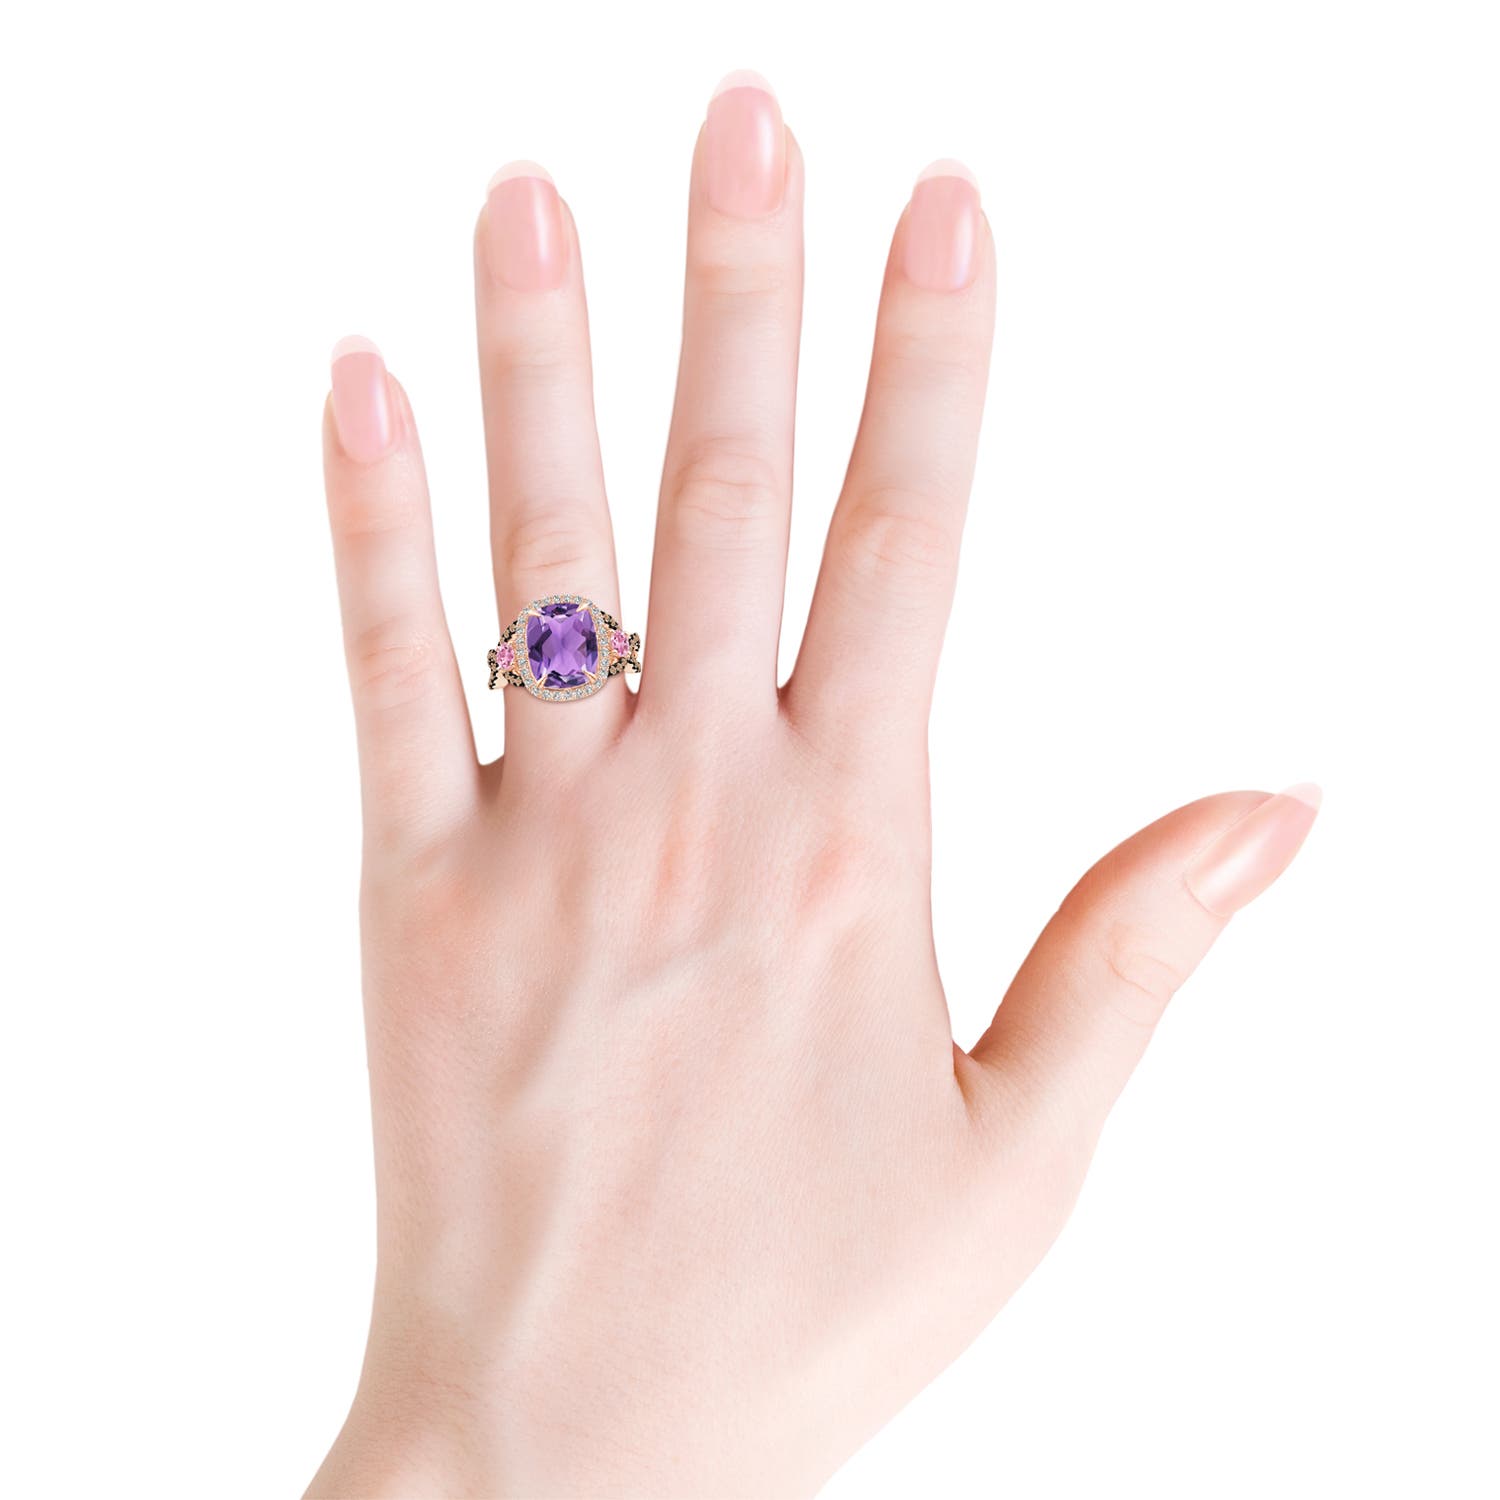 AA - Amethyst / 4.4 CT / 14 KT Rose Gold